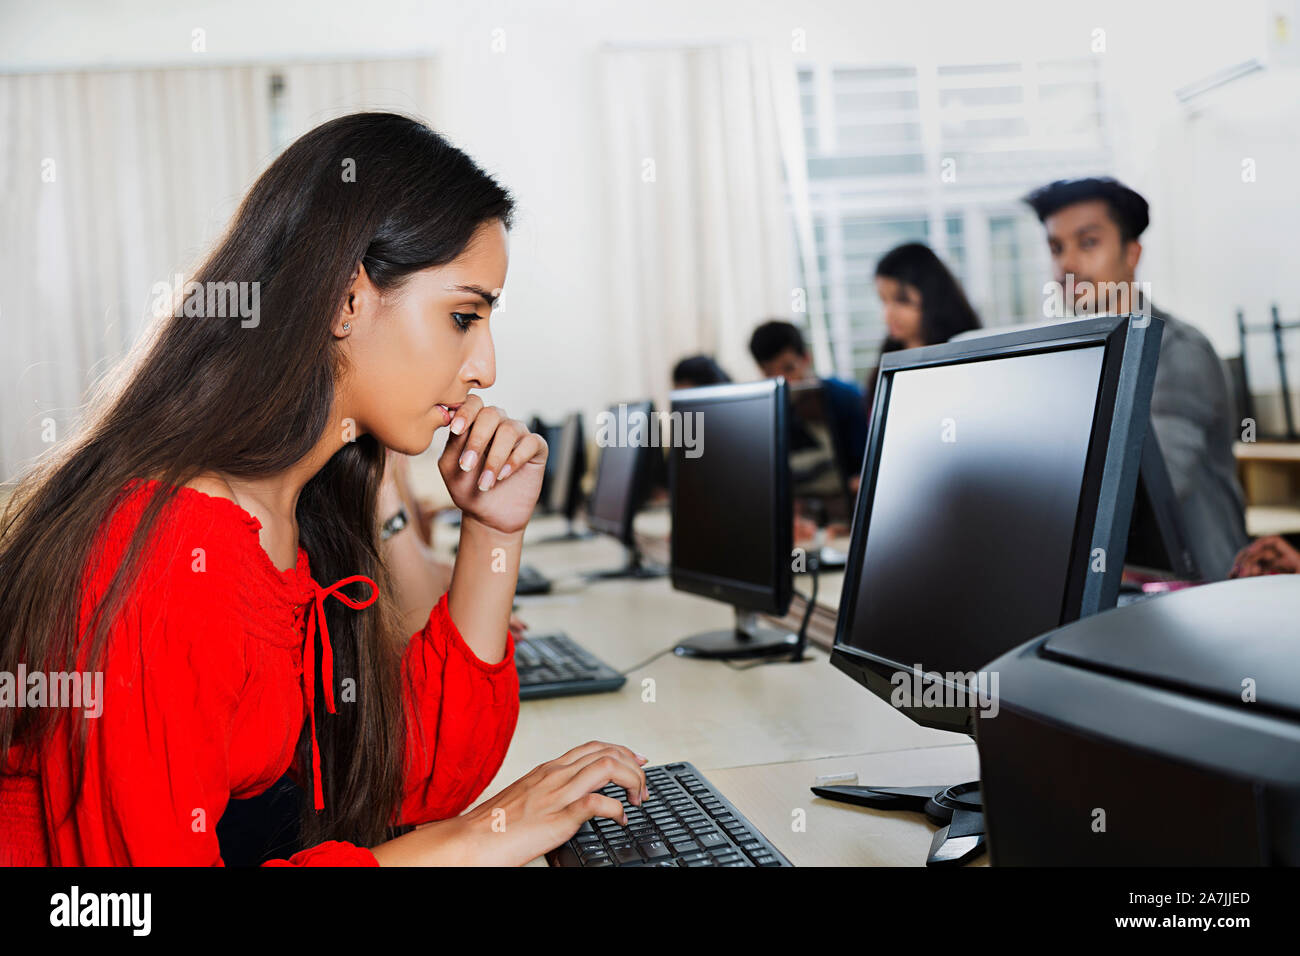 Teenager girl College Student Using Computer Studying E-Learning With Classmates At Computer Class Stock Photo